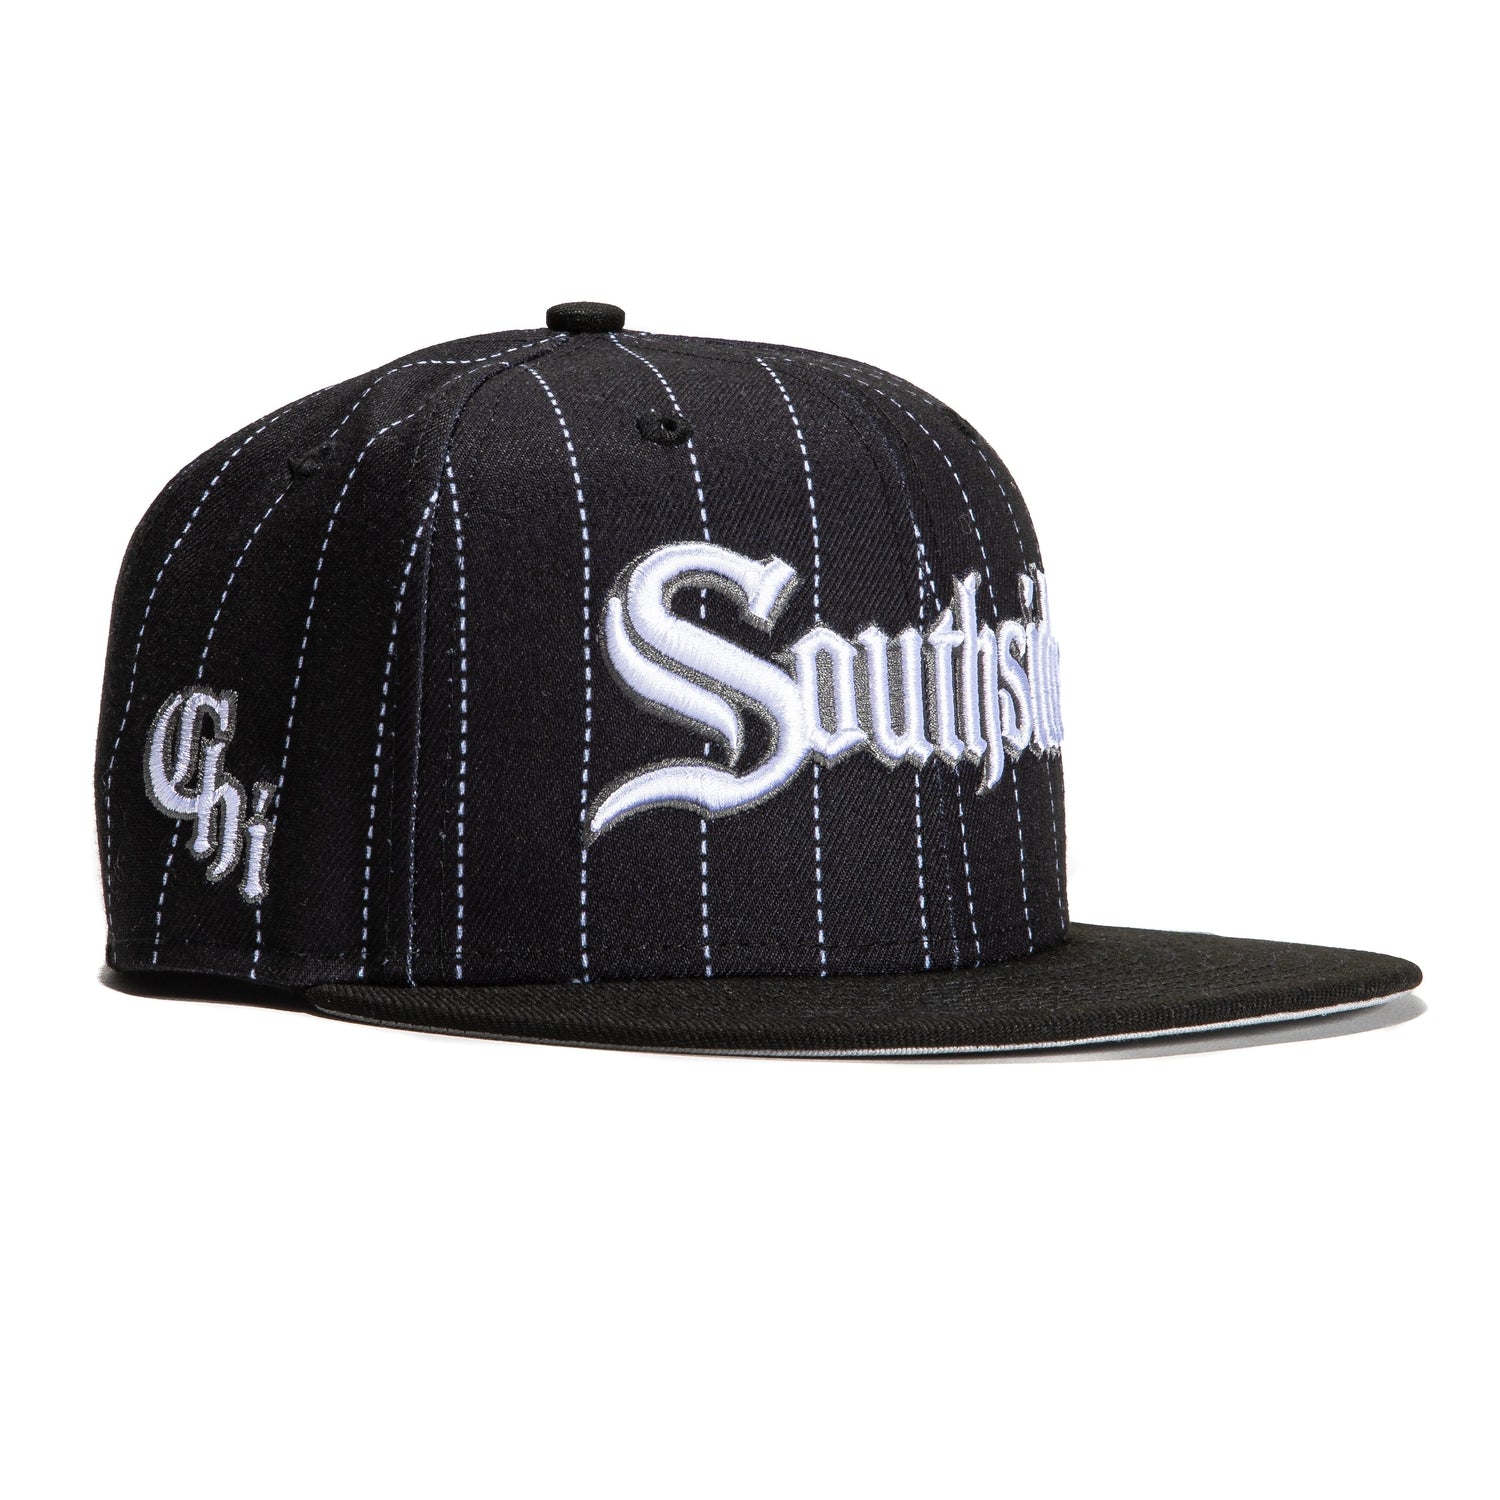 Southside Dad hat (Black and White) – ChiBoys LLC